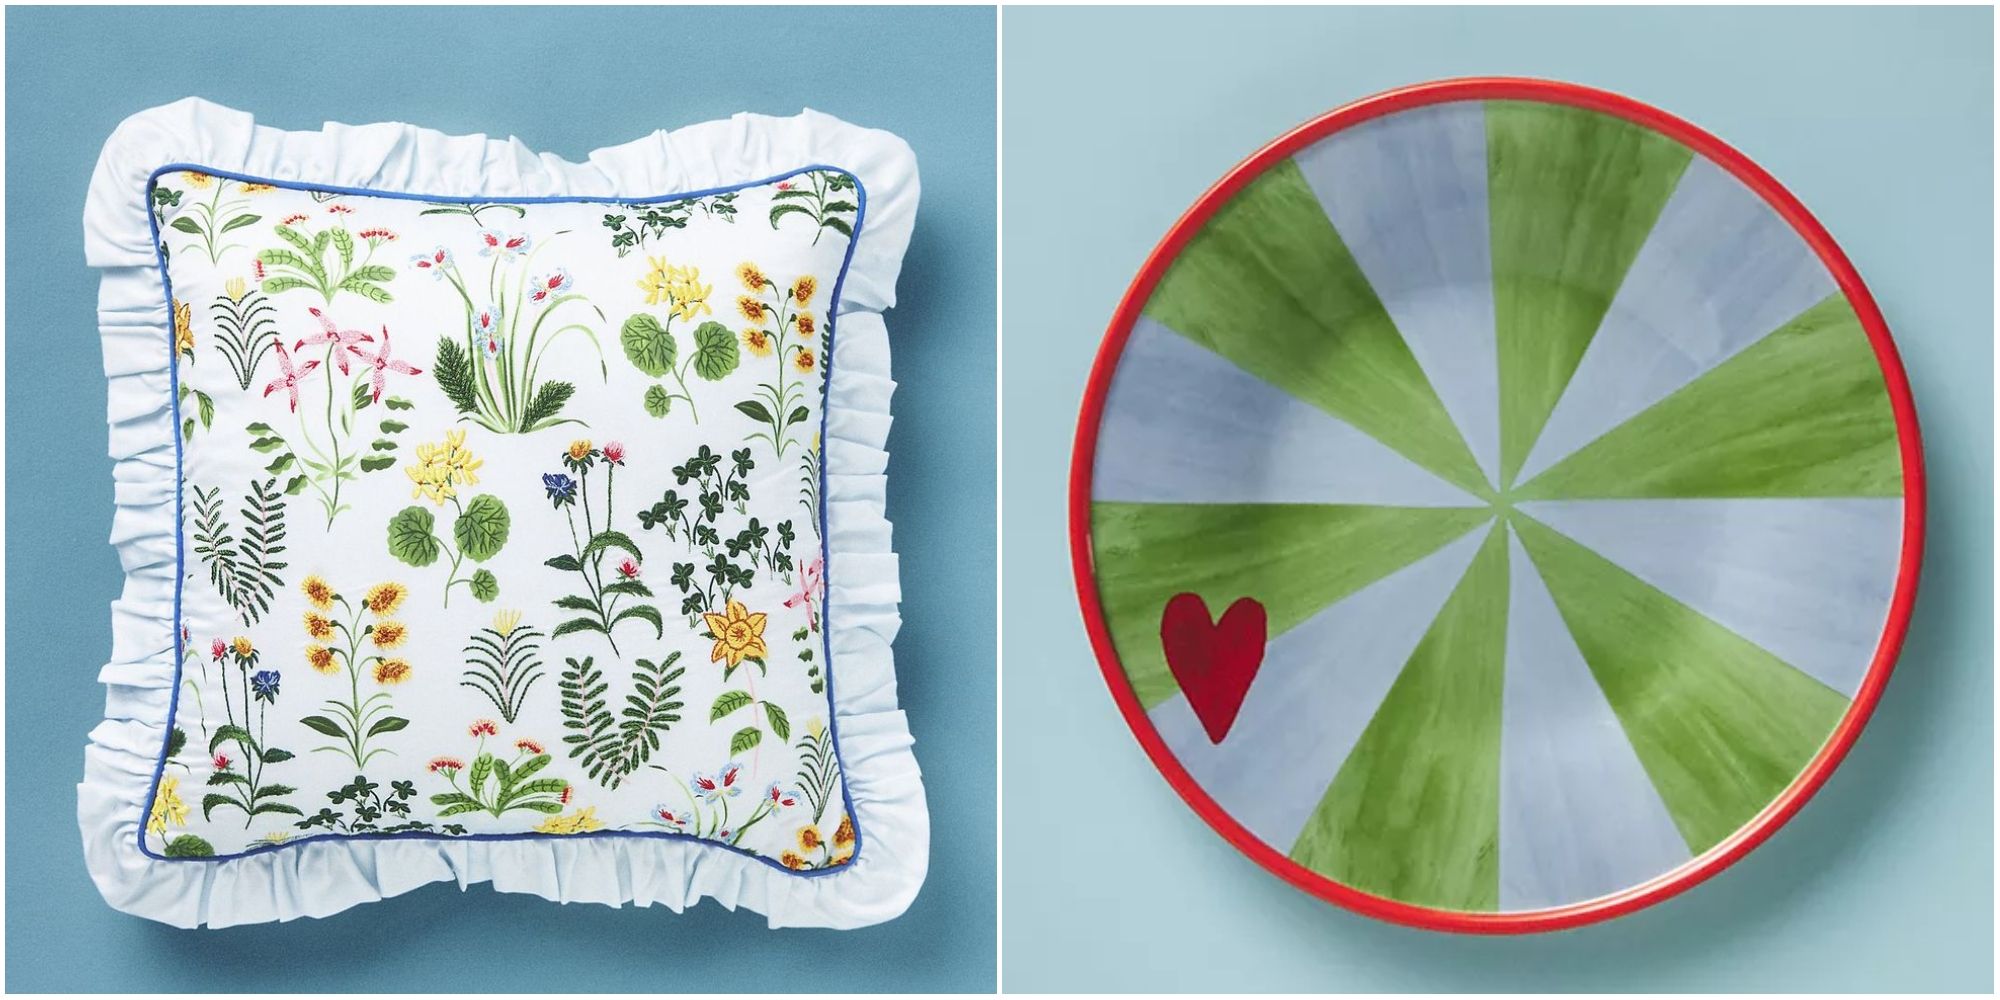 The Anthropologie x Pernille Rosenkilde Collection Has Launched